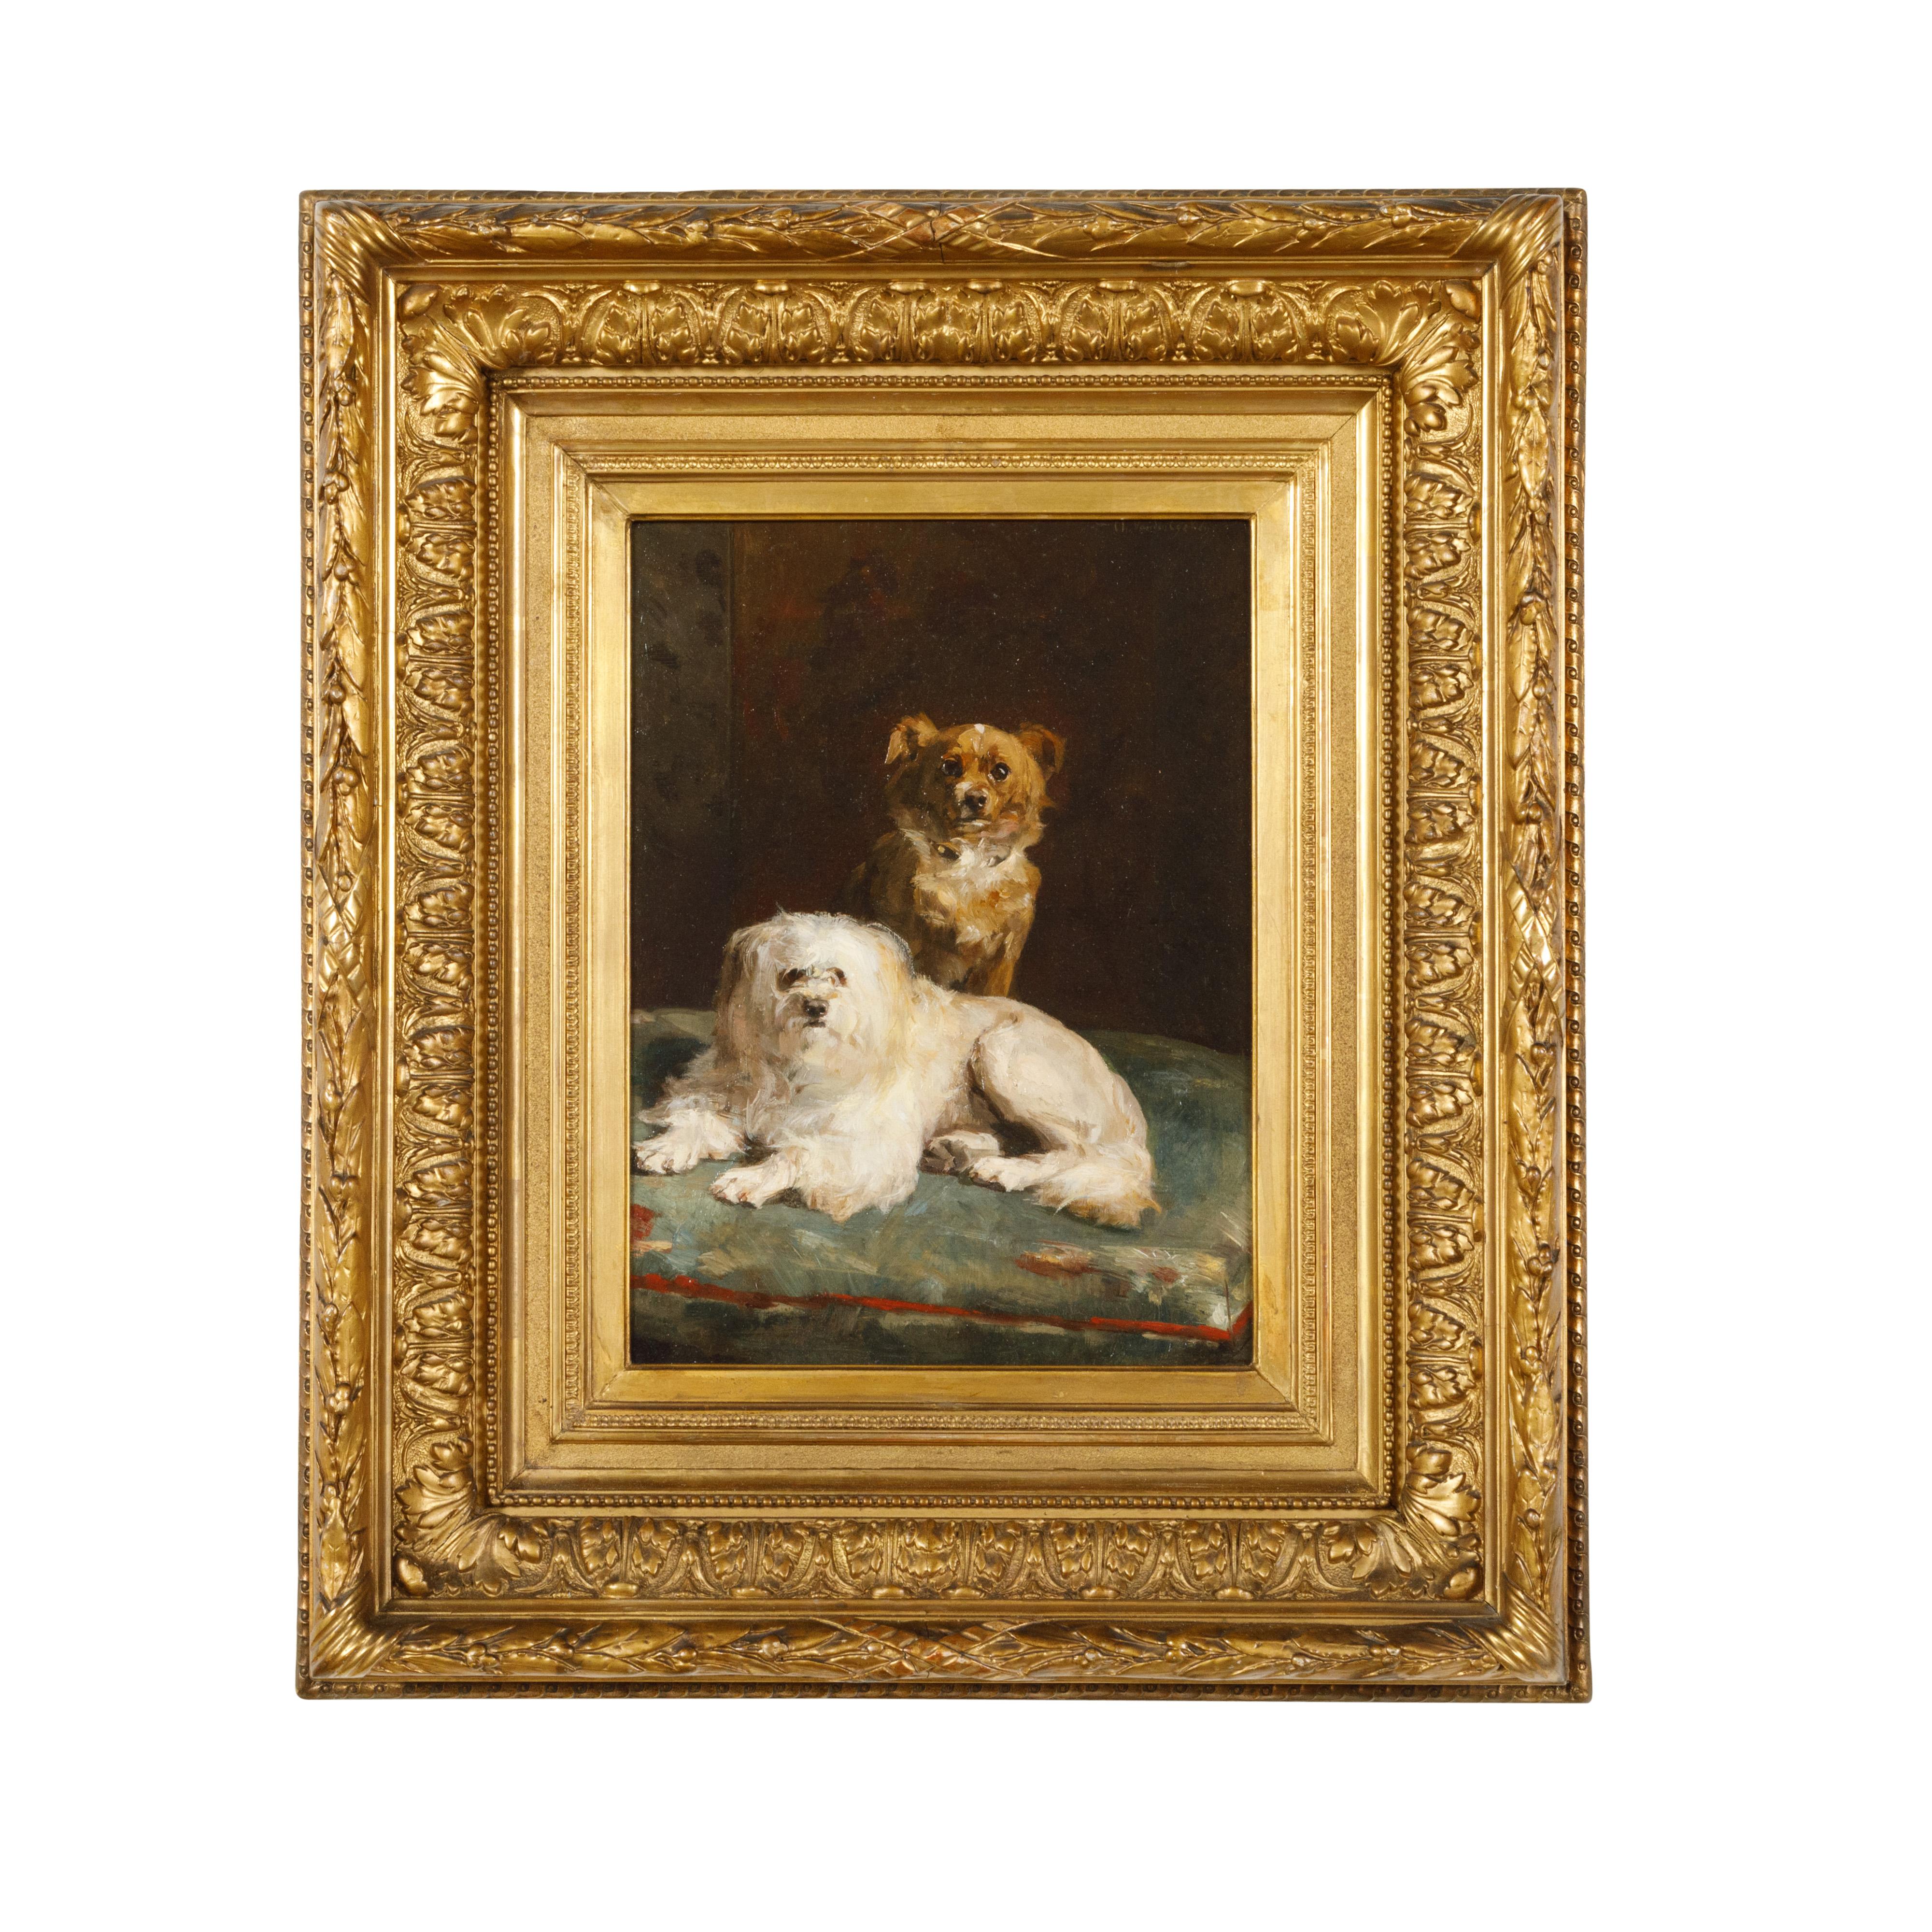 Giltwood Framed Oil on Canvas Dog Painting by Charles Van den Eycken